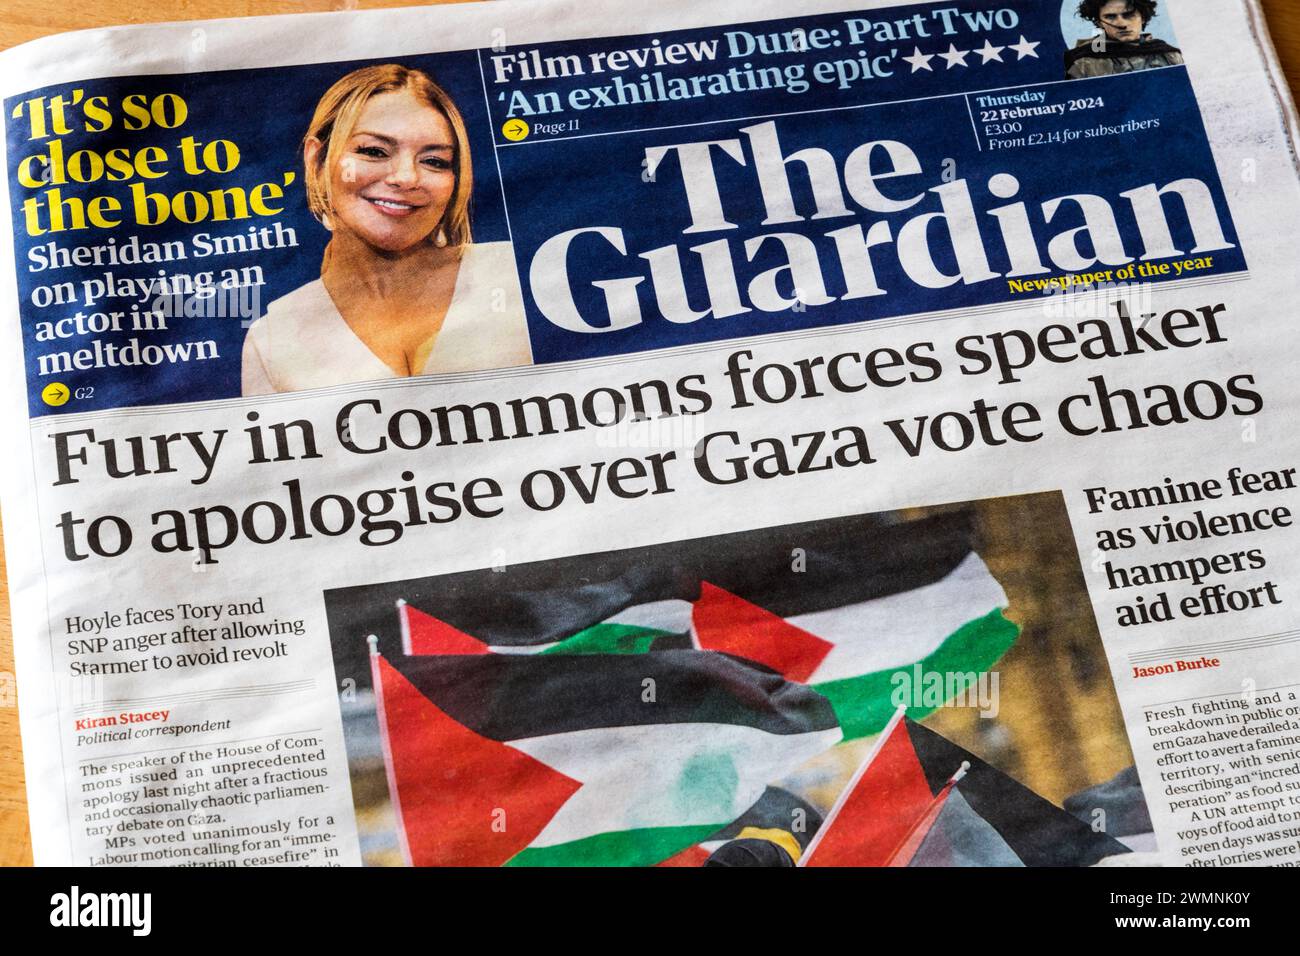 22 February 2024. Headline in Guardian reads Fury in Commons forces speaker to apologise over Gaza vote chaos. Stock Photo